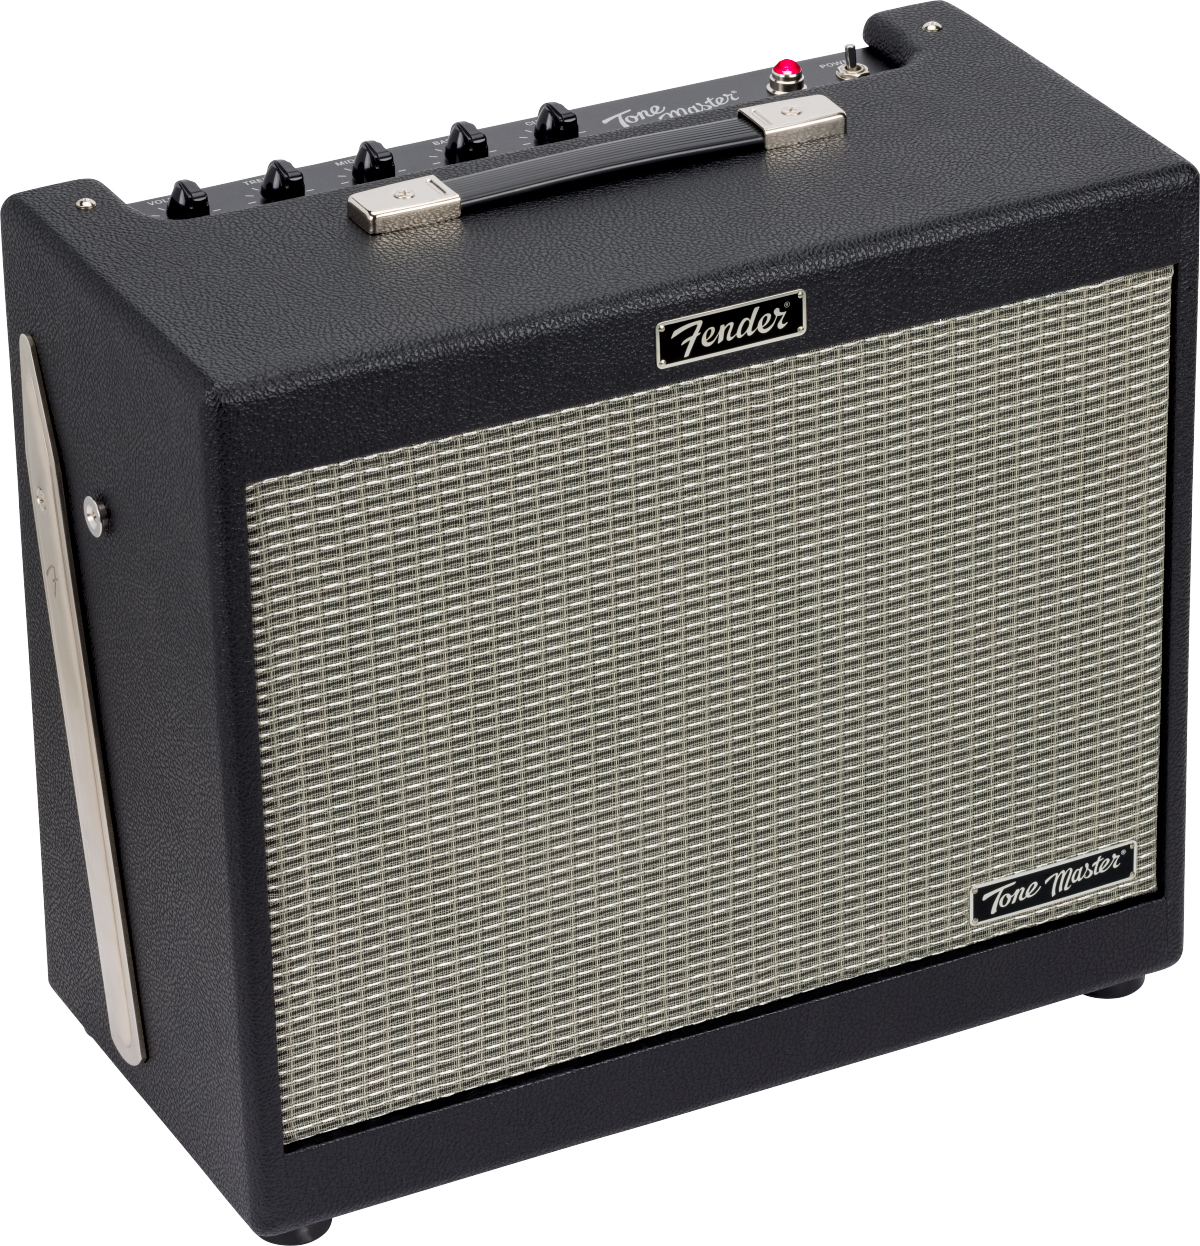 Fender Tone Master Fr-10 Powered Speaker Cab 1x10 1000w - Electric guitar combo amp - Main picture